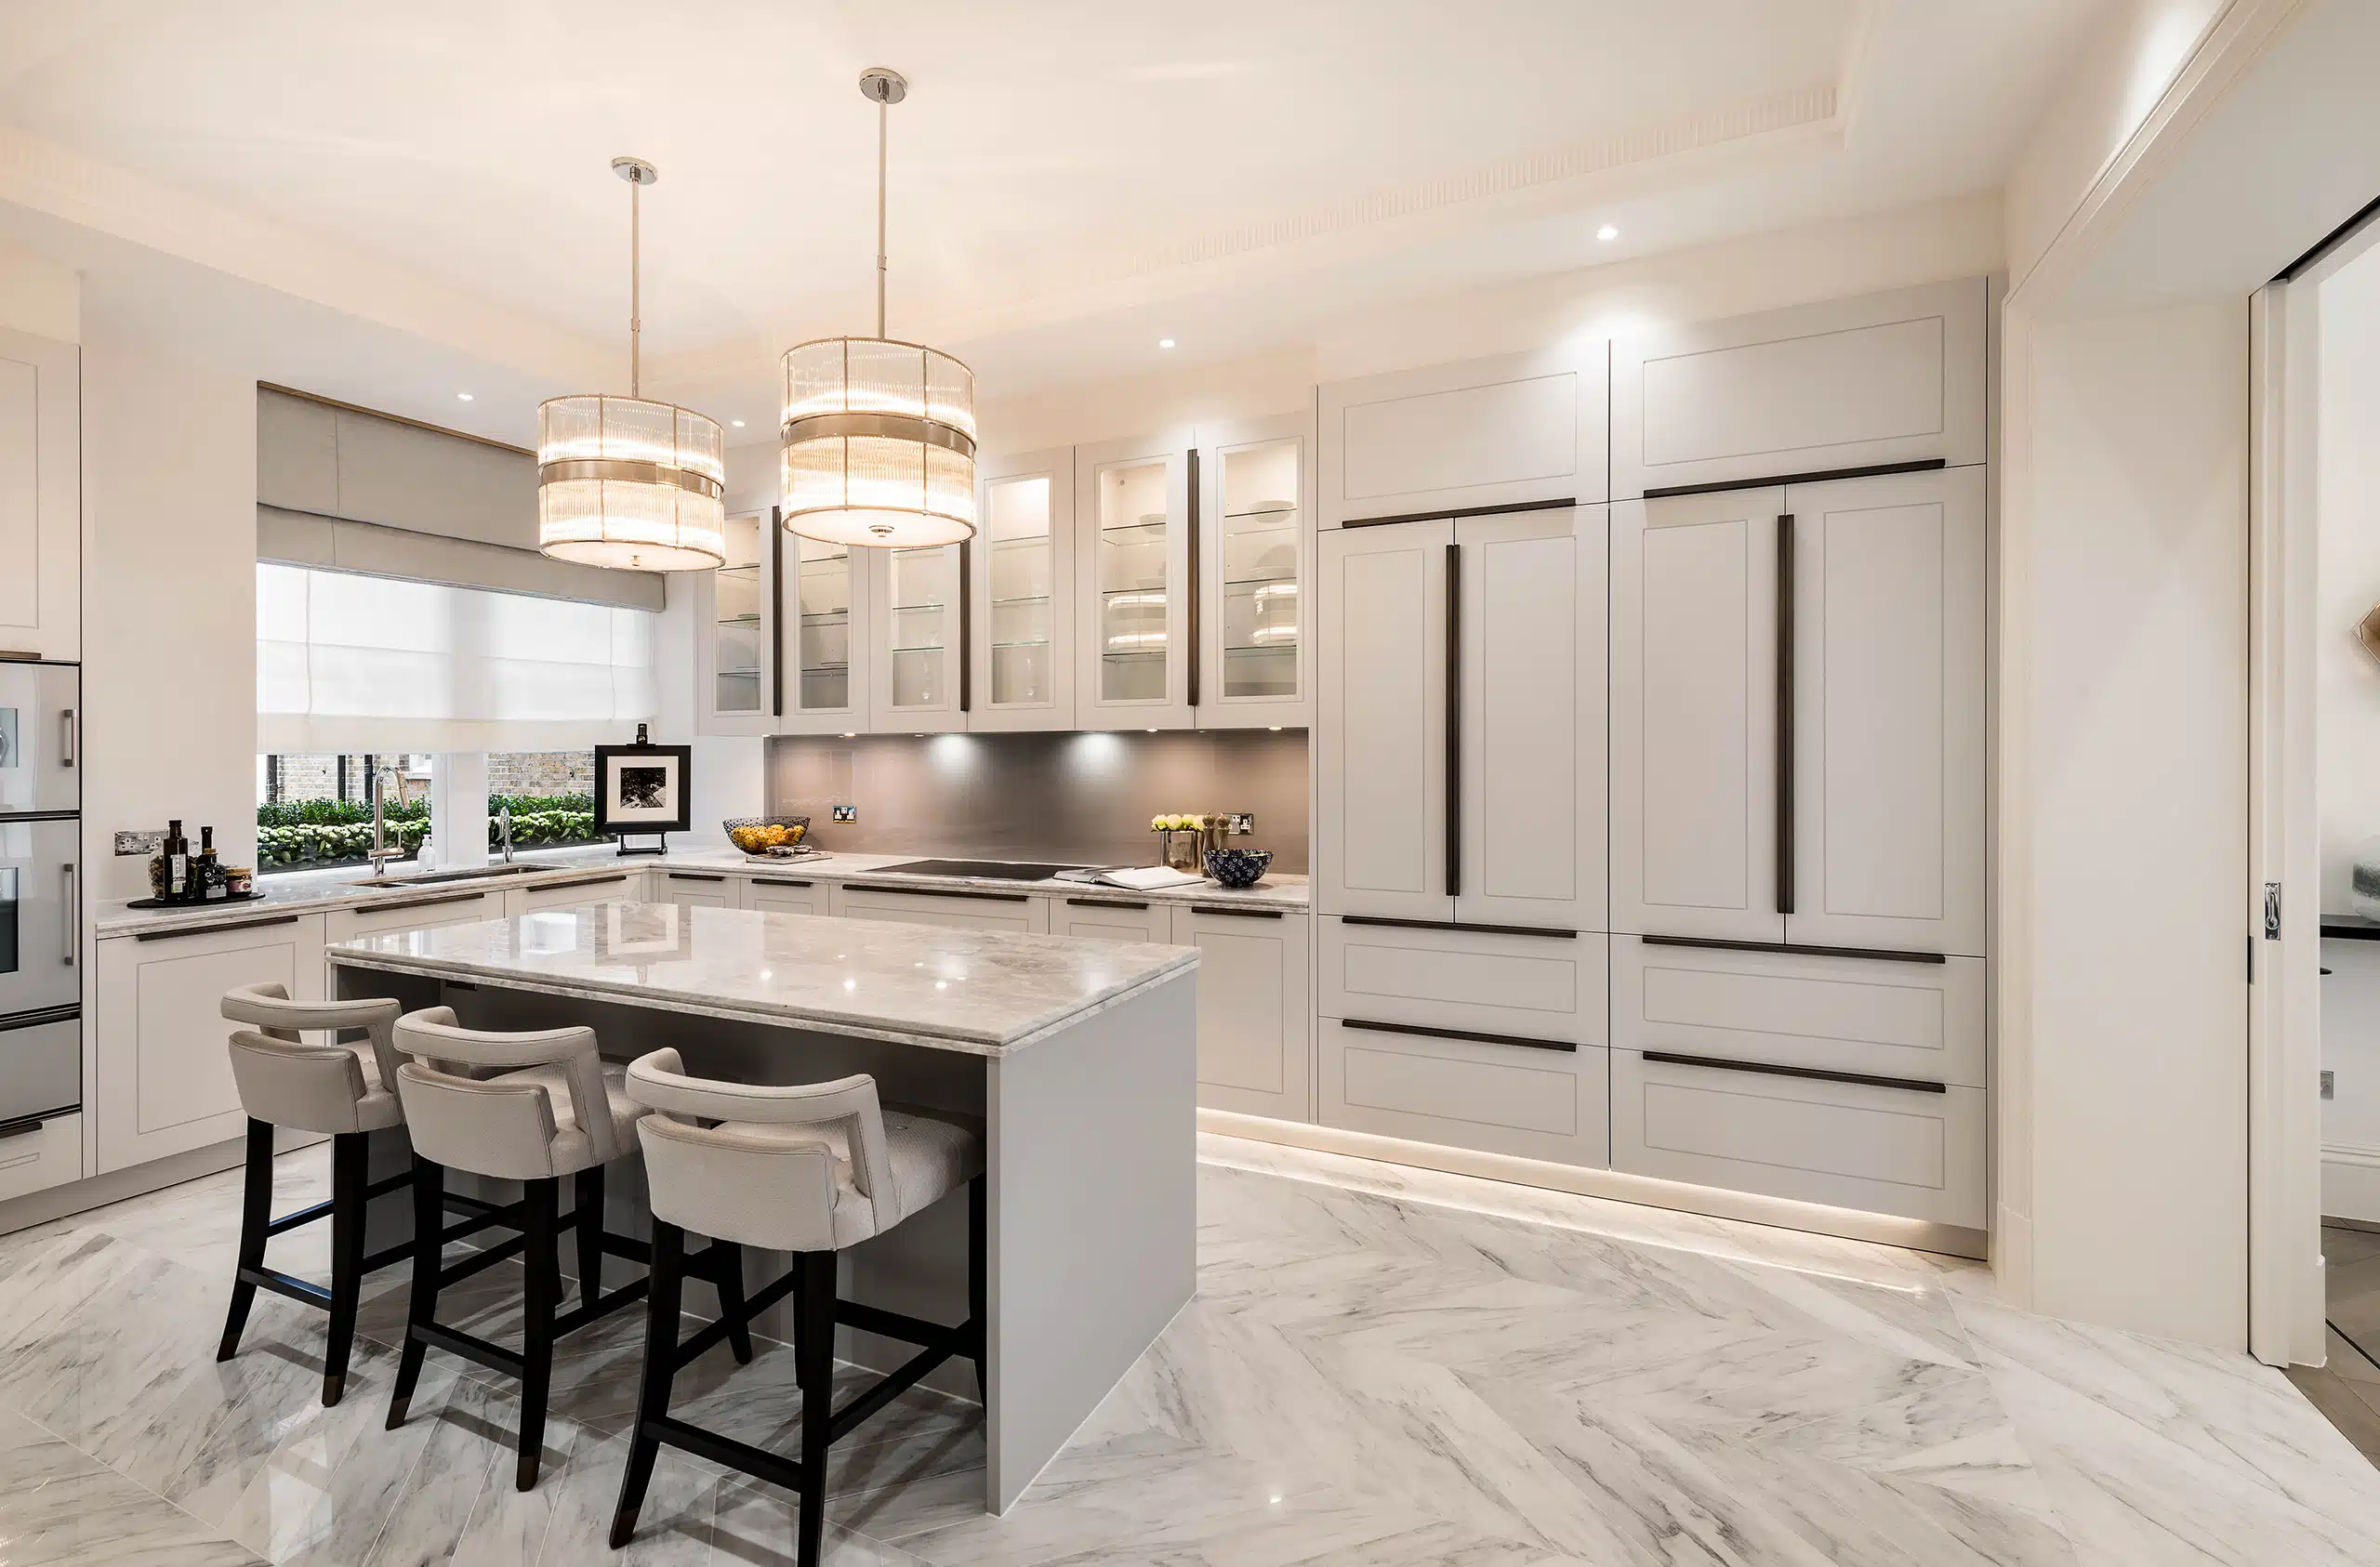 A contemporary kitchen design with silver and chrome details by katharine pooleys design studio